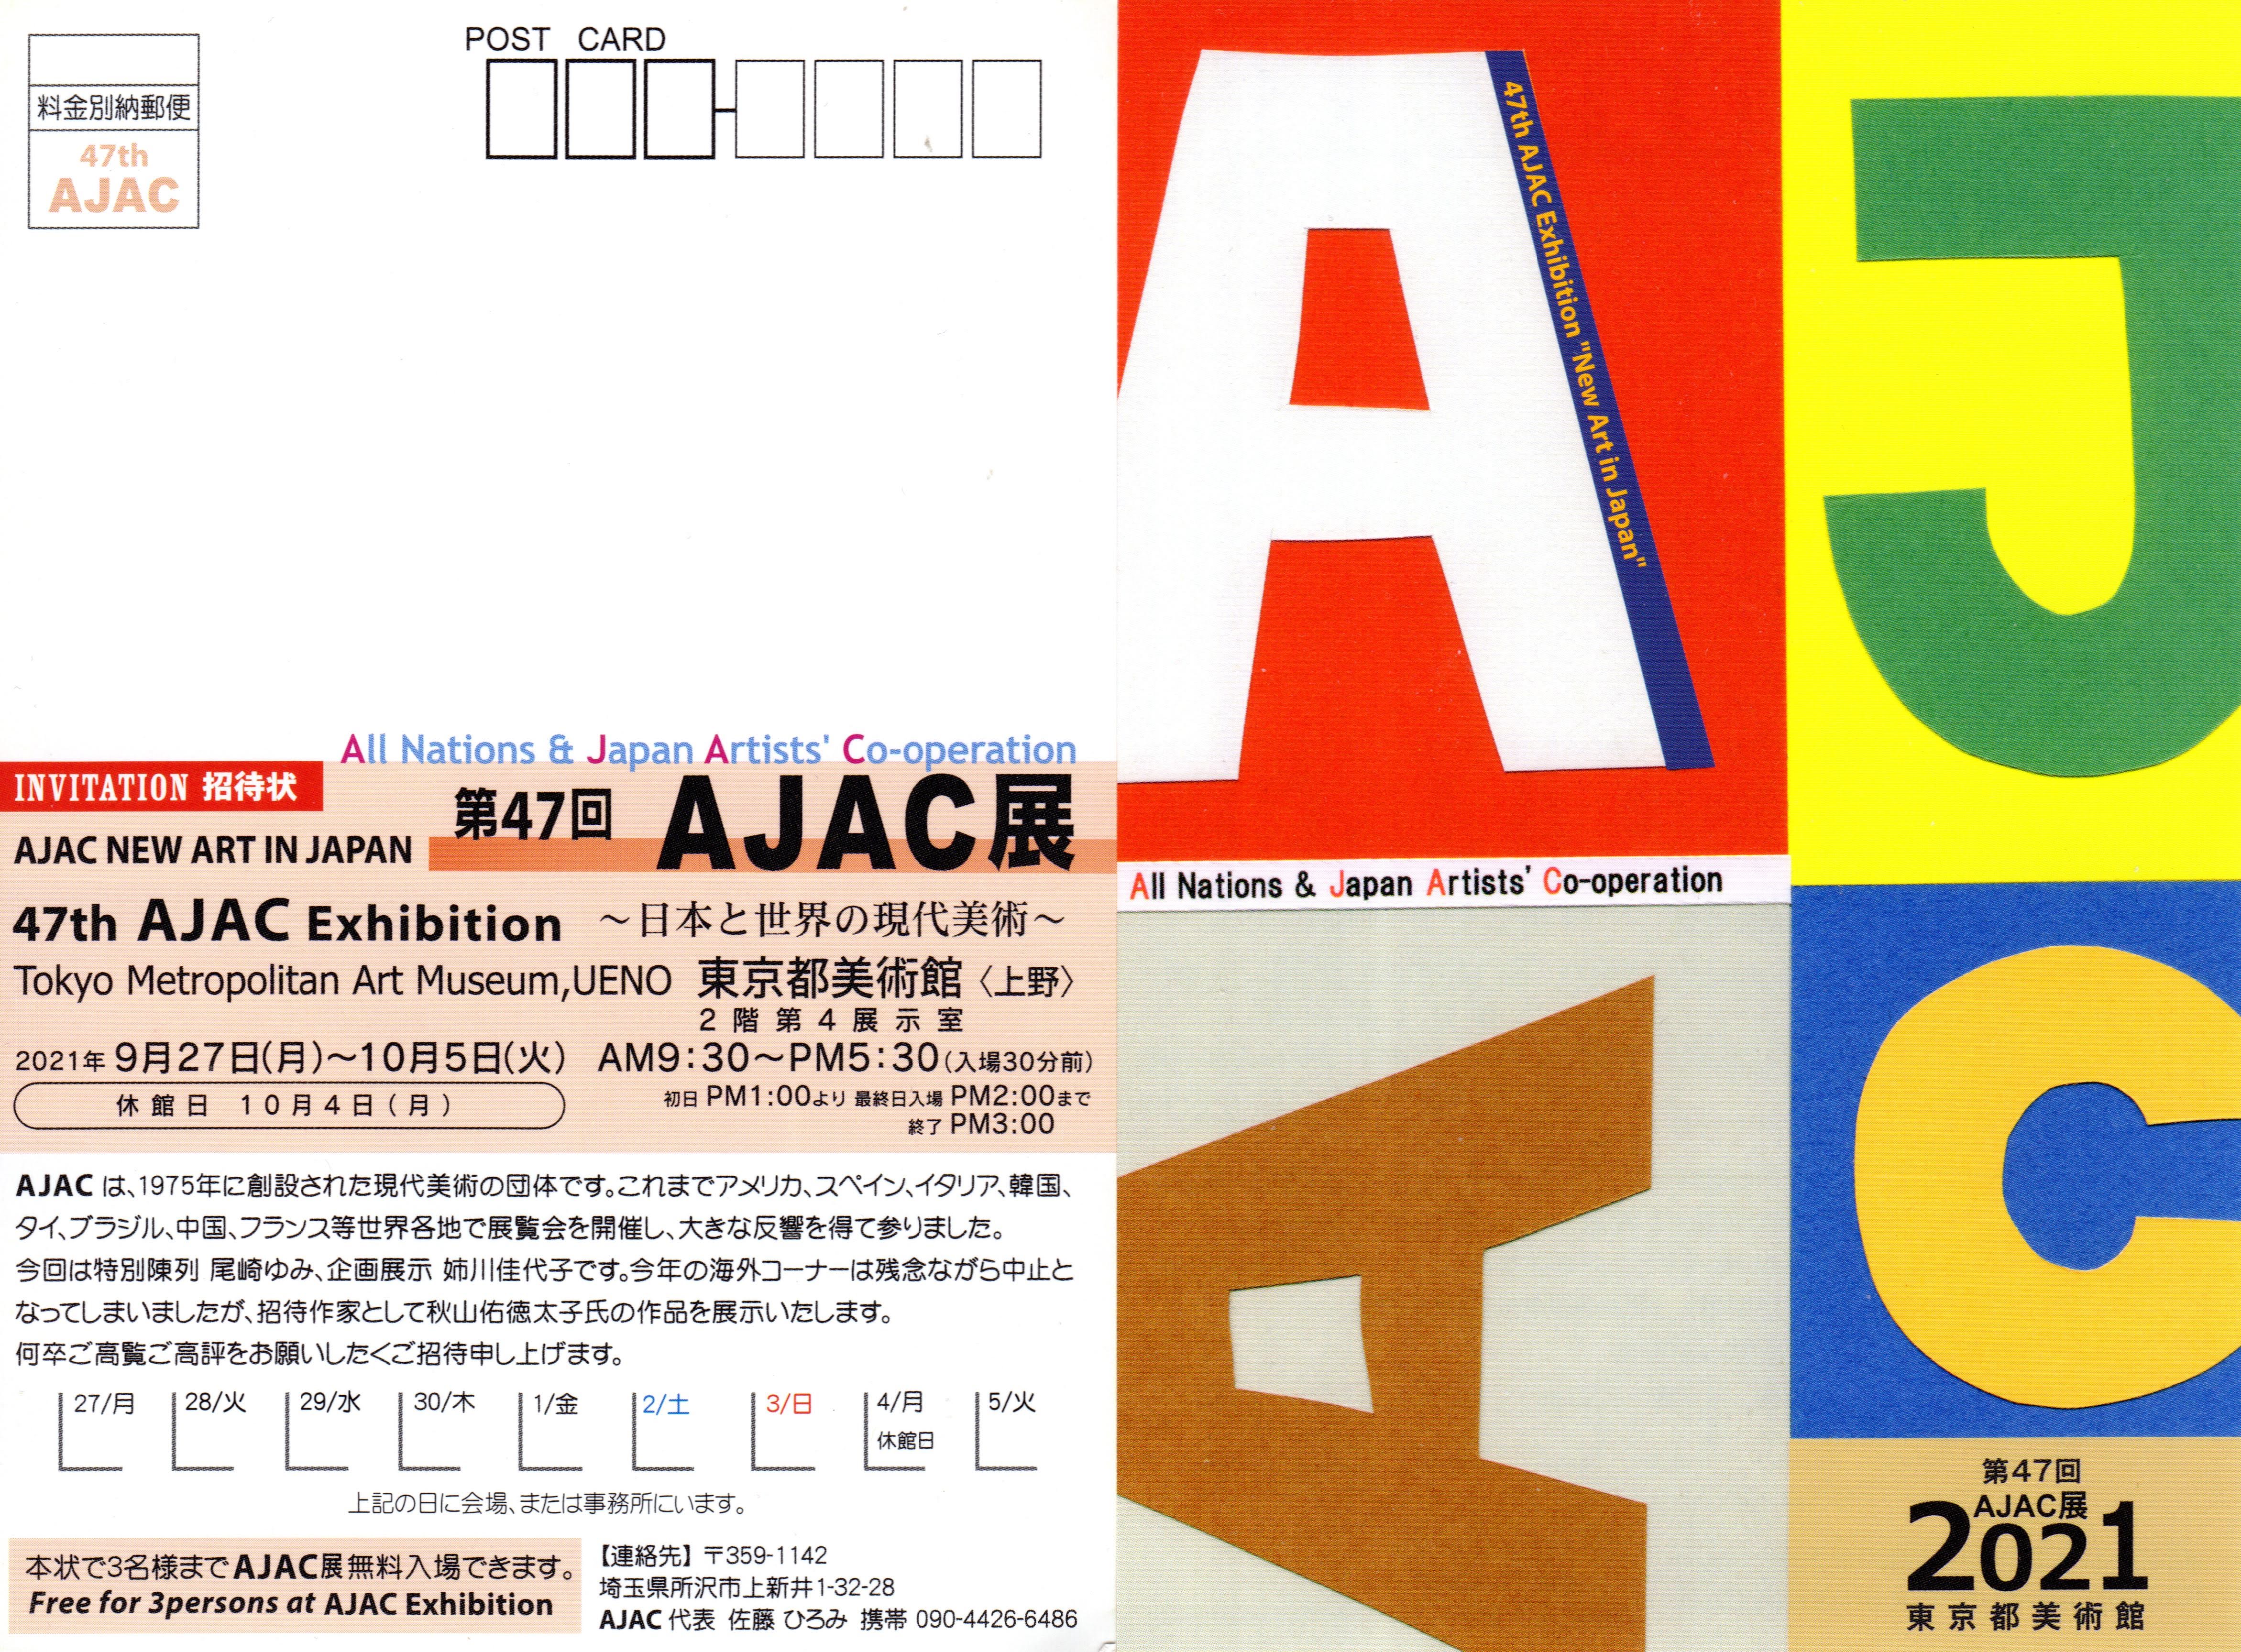 47th [AJAC] Exhibition [New Art in Japan] (All Nations & Japan Artist's Co-operation) 2021